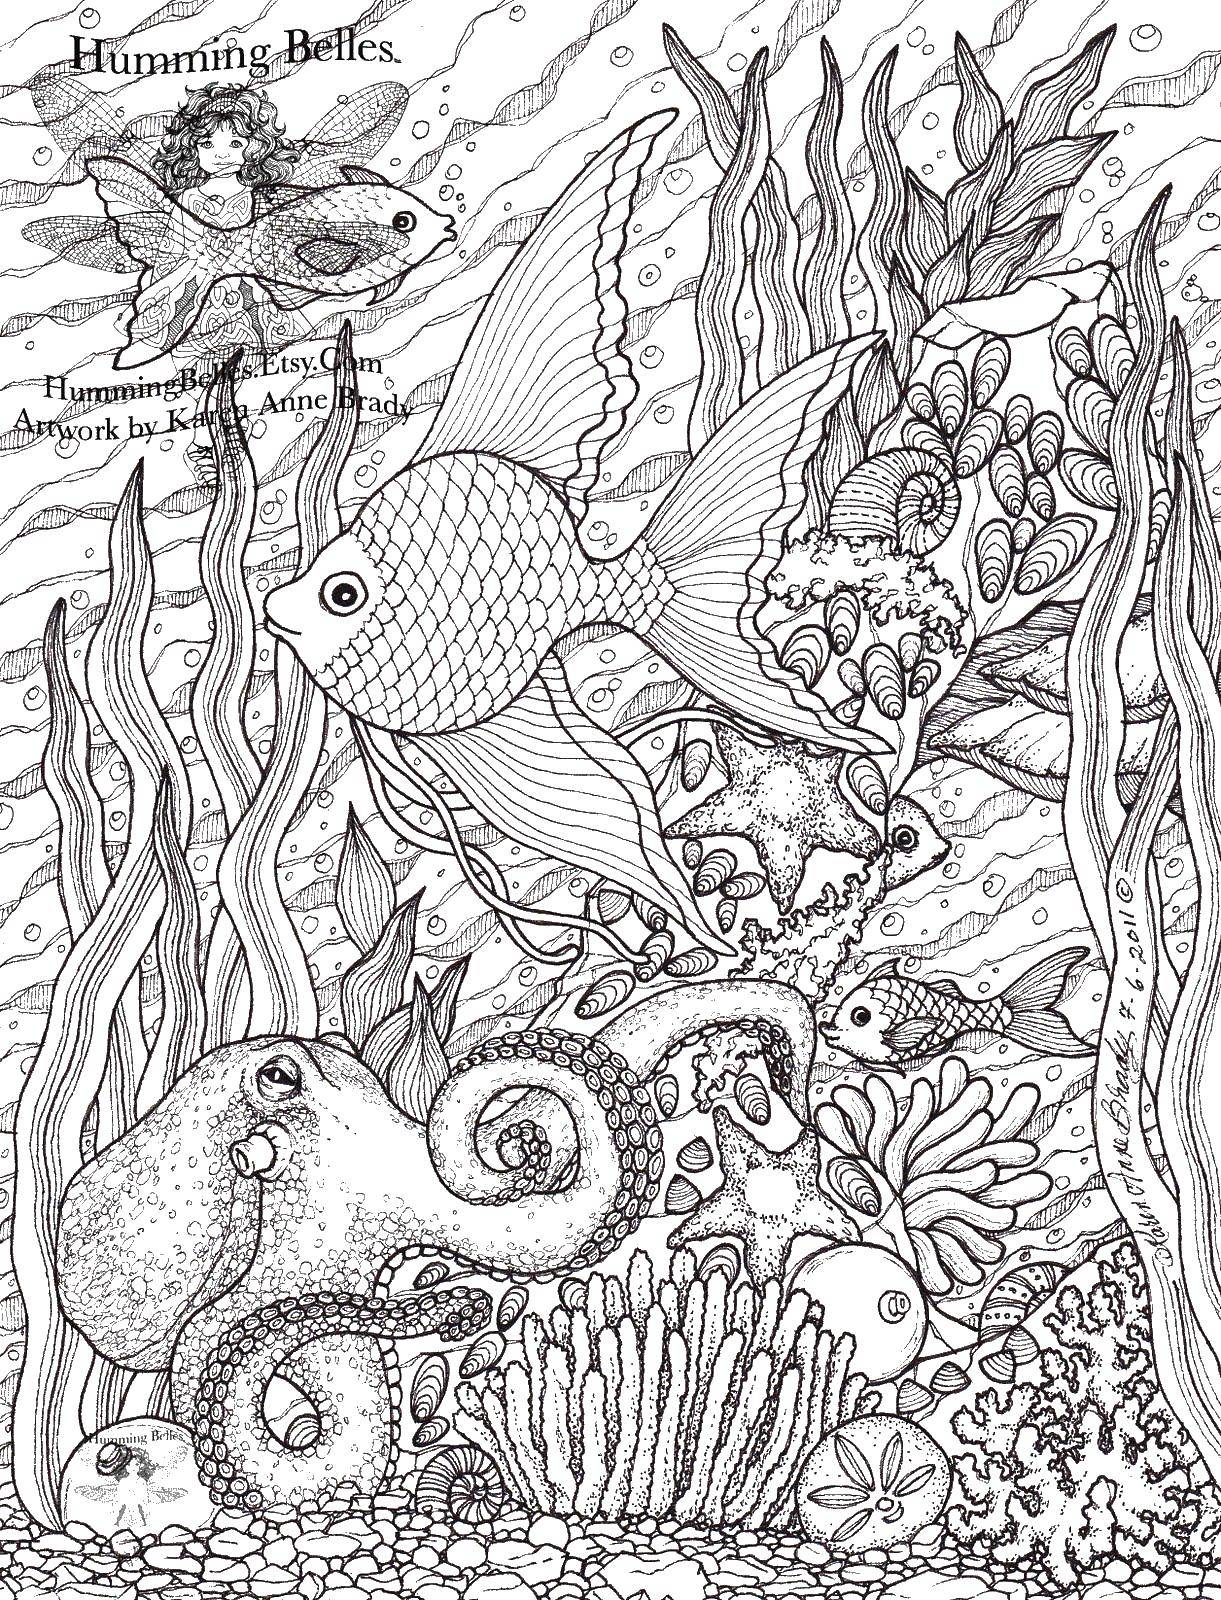 Coloring Underwater world. Category fish. Tags:  underwater world, embroidery.